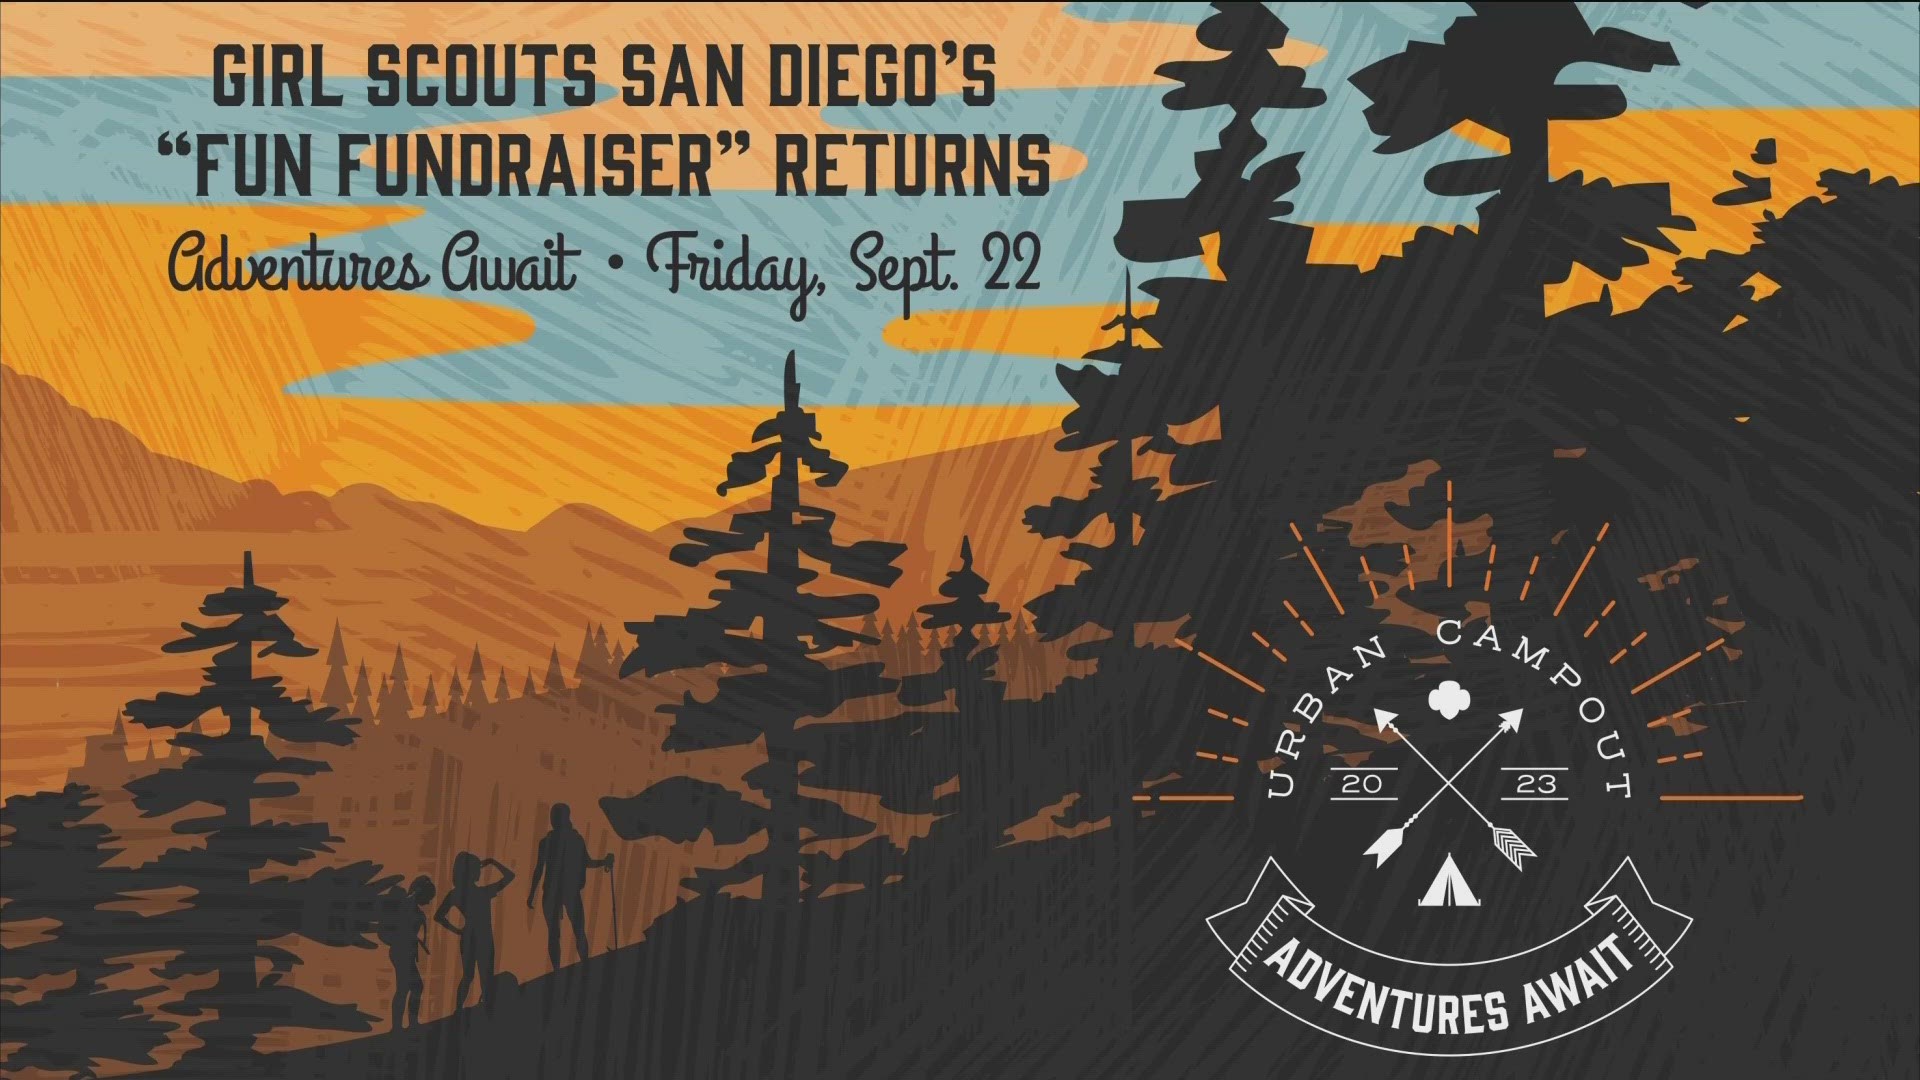 Adventure awaits! The Girl Scouts San Diego is holding their annual fundraiser, 'Urban Compound,' this weekend.